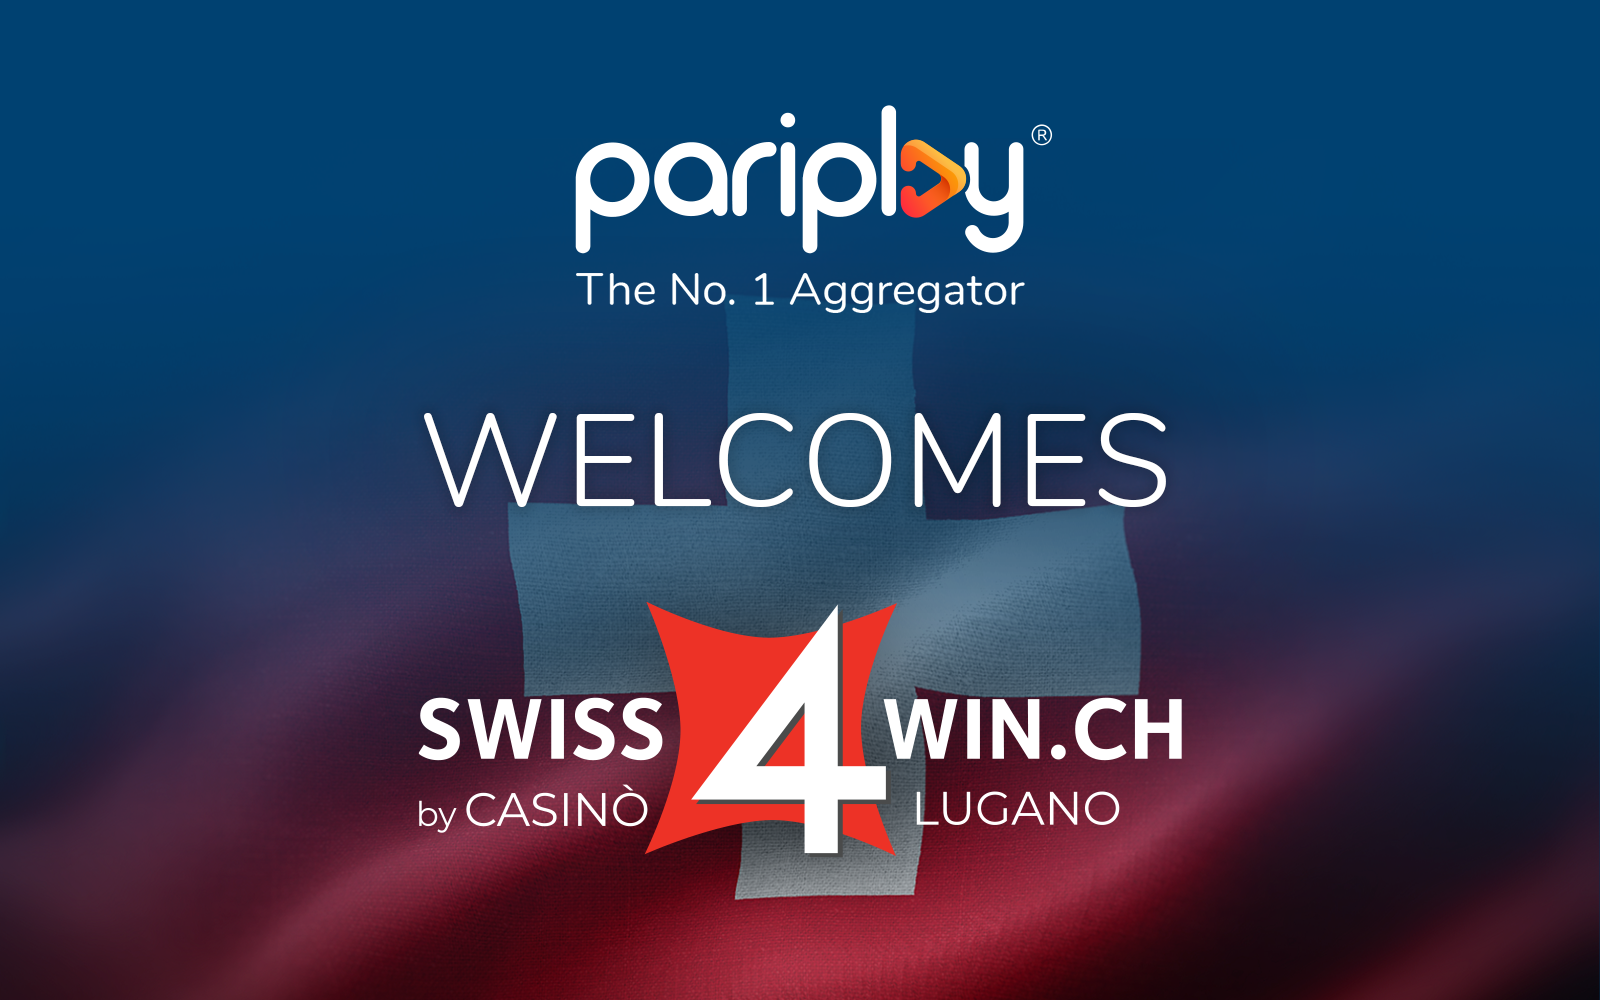 Pariplay, has increased its foothold in Switzerland by going live with Swiss4Win.ch, the online gaming brand of Casinò Lugano.